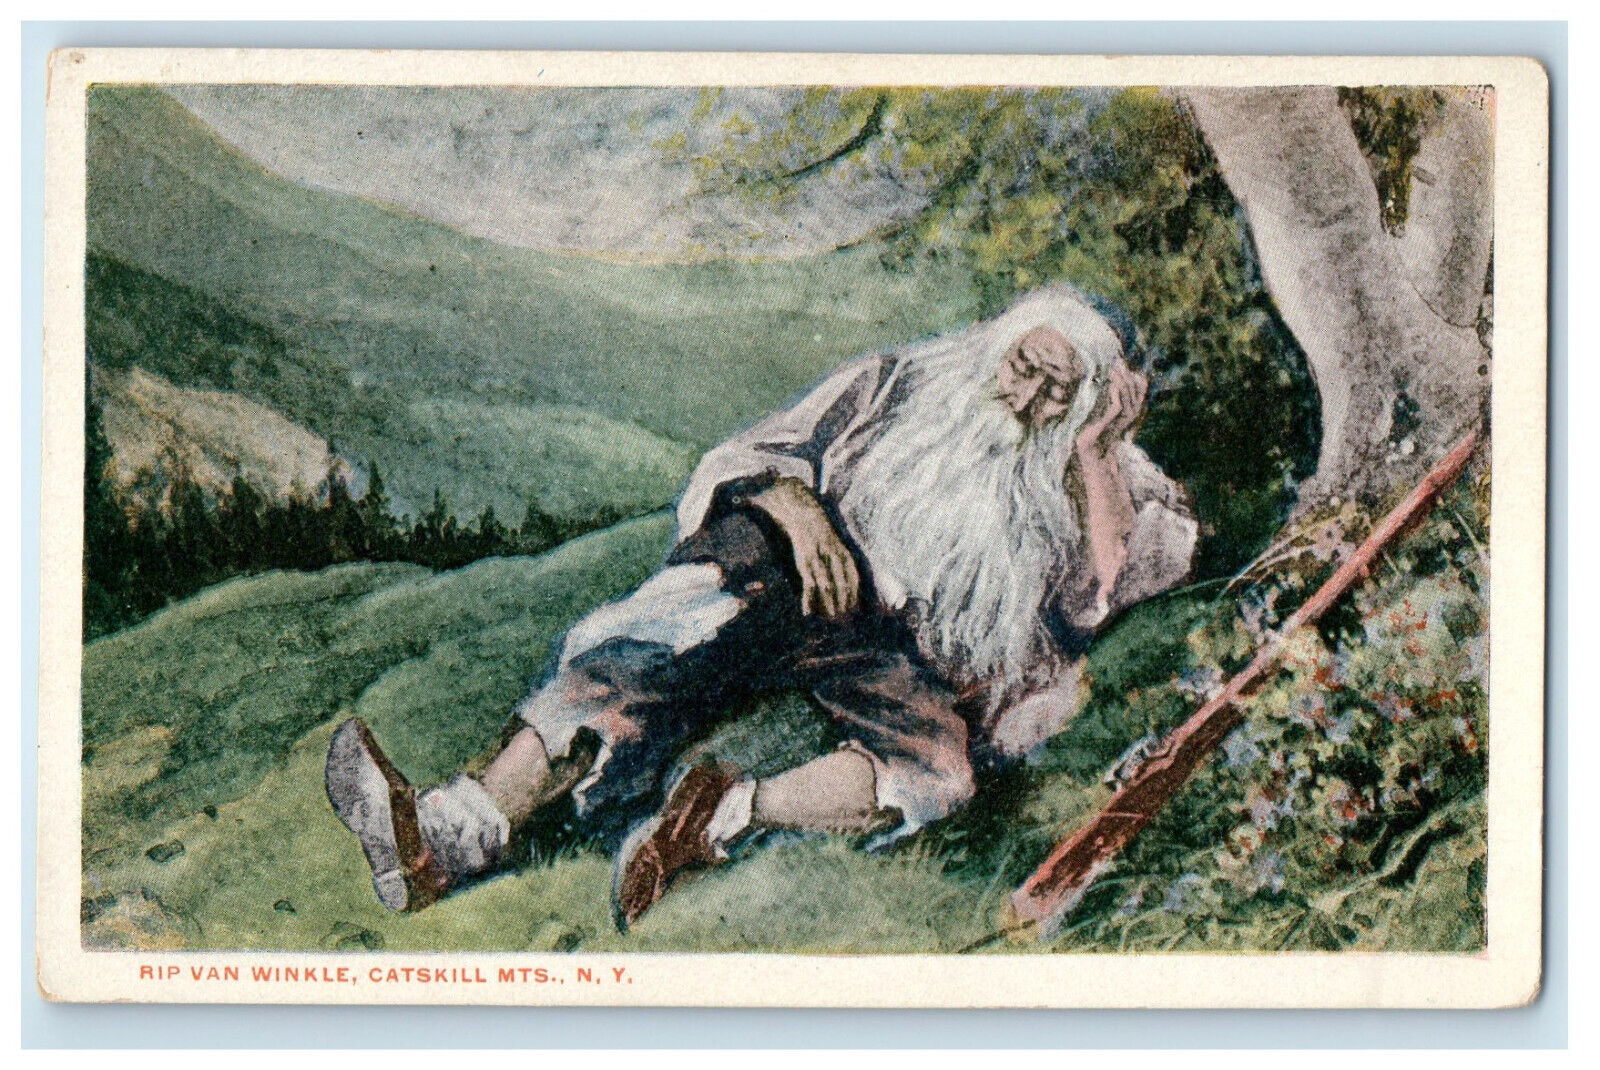 c1920s Rip Van Winkle, Catskill Mountains New York NY Unposted Postcard